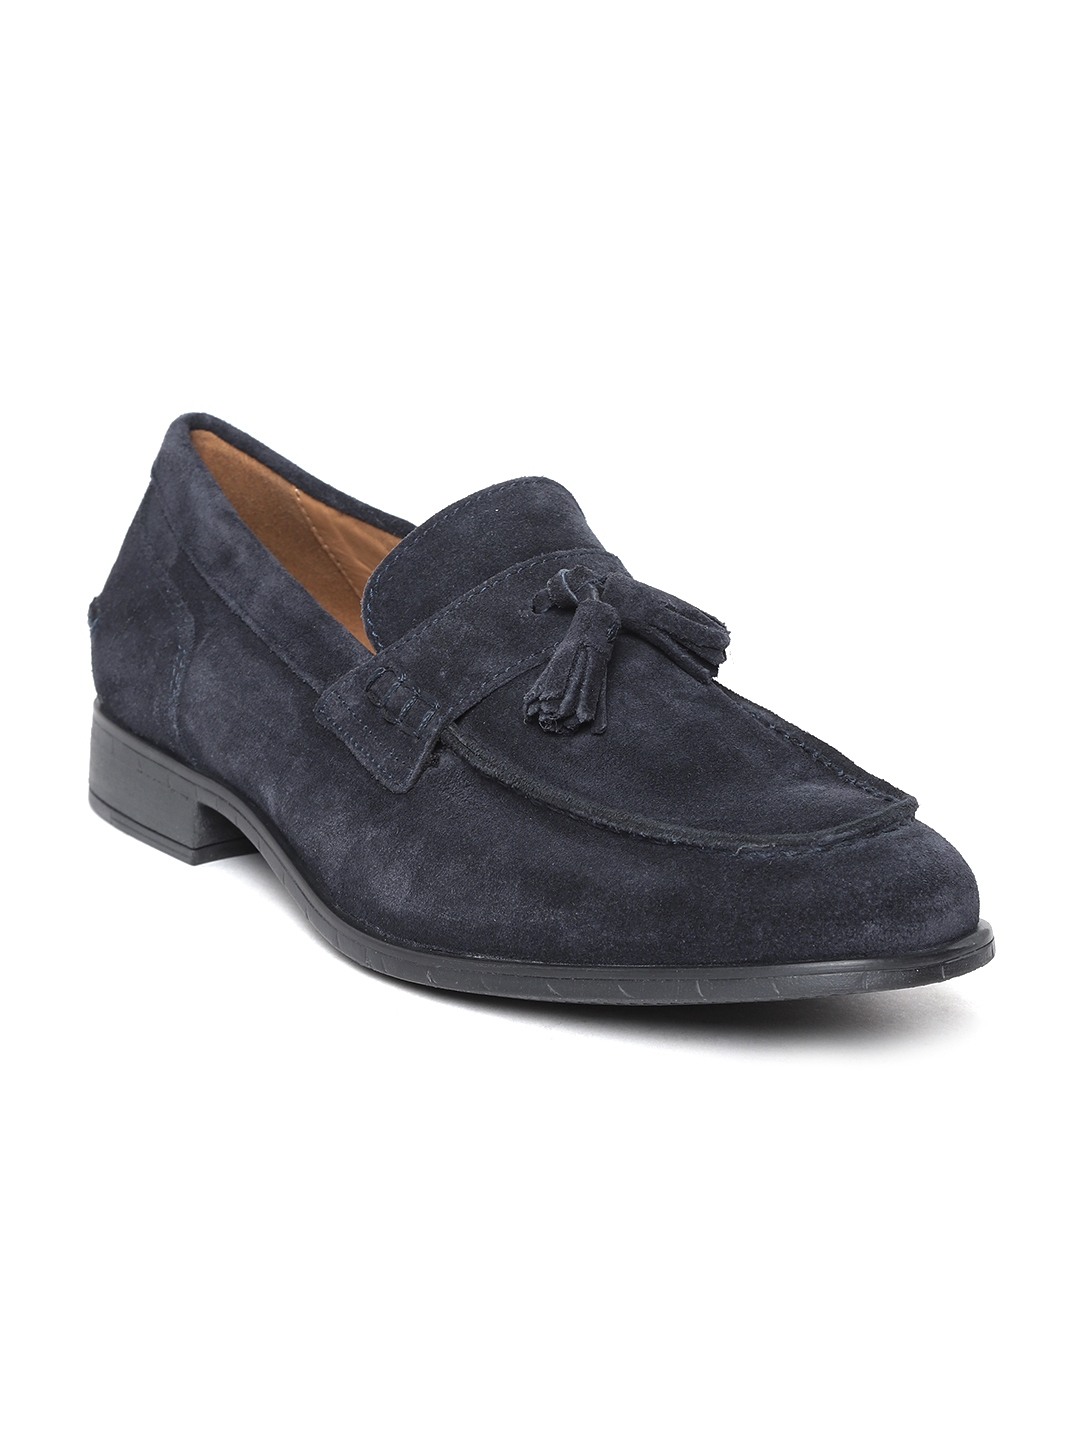 Buy Geox Men Navy Blue Suede Tassel Loafers - Casual Shoes for Men ...